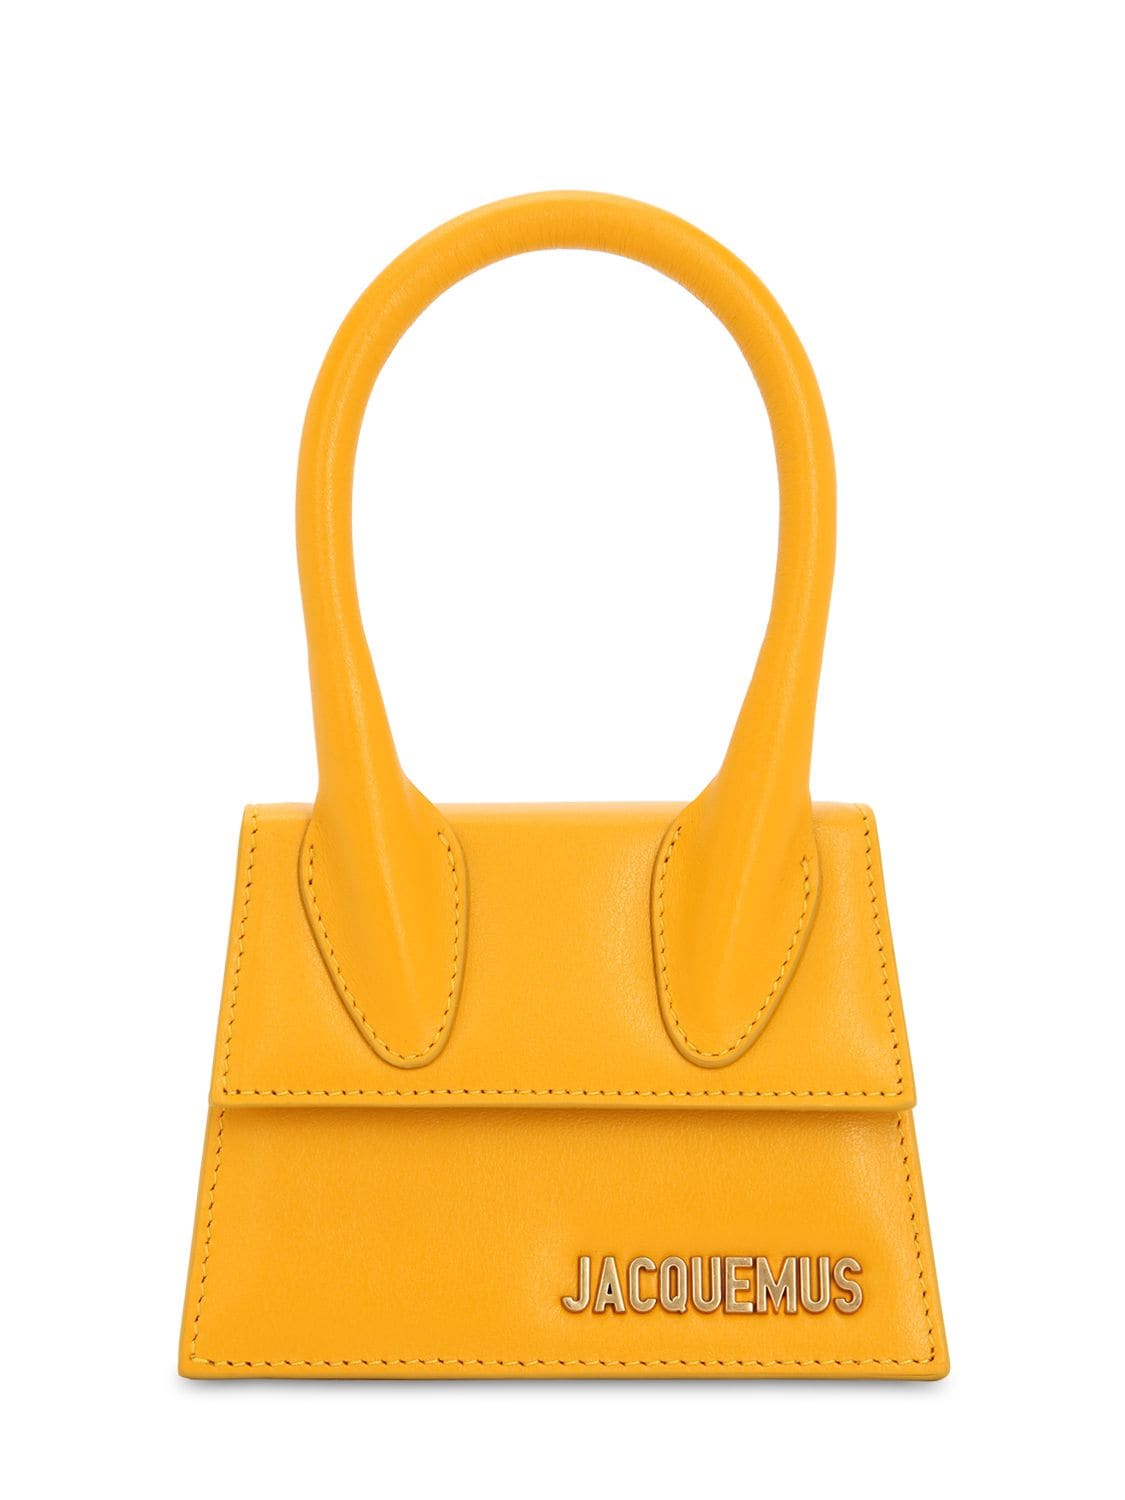 Jacquemus Le Chiquito Leather Bag In Yellow